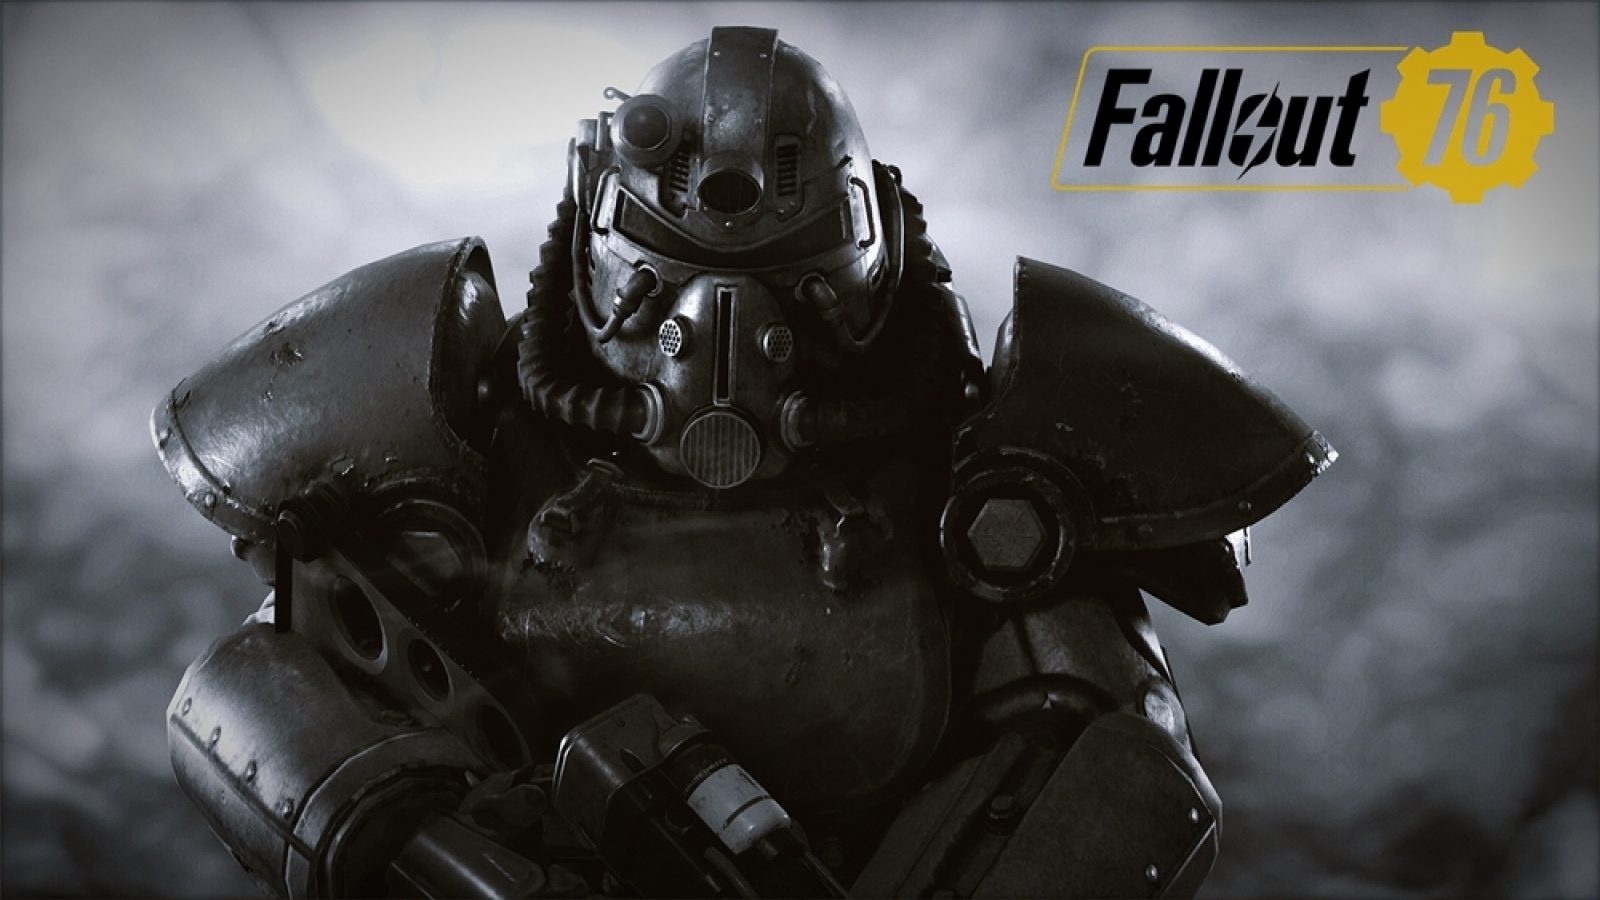 Is Fallout 76 down? Bethesda confirms downtime for server maintenance